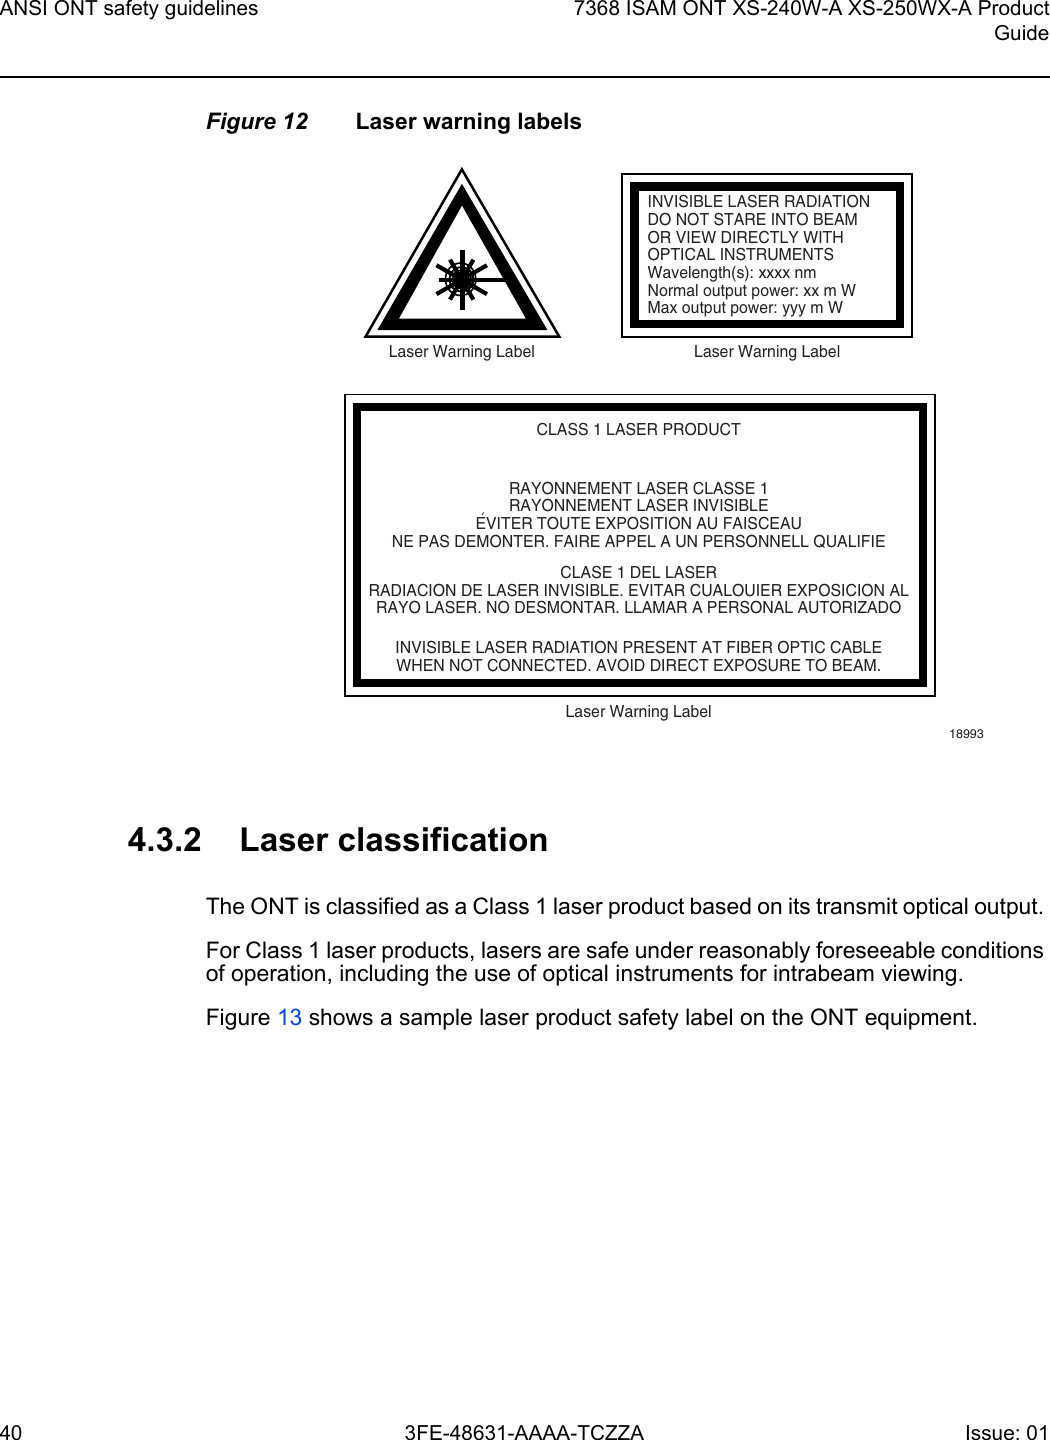 ANSI ONT safety guidelines407368 ISAM ONT XS-240W-A XS-250WX-A ProductGuide3FE-48631-AAAA-TCZZA Issue: 01 Figure 12 Laser warning labels4.3.2 Laser classificationThe ONT is classified as a Class 1 laser product based on its transmit optical output. For Class 1 laser products, lasers are safe under reasonably foreseeable conditions of operation, including the use of optical instruments for intrabeam viewing.Figure 13 shows a sample laser product safety label on the ONT equipment.INVISIBLE LASER RADIATIONDO NOT STARE INTO BEAMOR VIEW DIRECTLY WITHOPTICAL INSTRUMENTSWavelength(s): xxxx nmNormal output power: xx m WMax output power: yyy m WLaser Warning Label Laser Warning LabelCLASS 1 LASER PRODUCTINVISIBLE LASER RADIATION PRESENT AT FIBER OPTIC CABLEWHEN NOT CONNECTED. AVOID DIRECT EXPOSURE TO BEAM.RAYONNEMENT LASER CLASSE 1RAYONNEMENT LASER INVISIBLEEVITER TOUTE EXPOSITION AU FAISCEAUNE PAS DEMONTER. FAIRE APPEL A UN PERSONNELL QUALIFIECLASE 1 DEL LASERRADIACION DE LASER INVISIBLE. EVITAR CUALOUIER EXPOSICION ALRAYO LASER. NO DESMONTAR. LLAMAR A PERSONAL AUTORIZADOLaser Warning Label18993&apos;